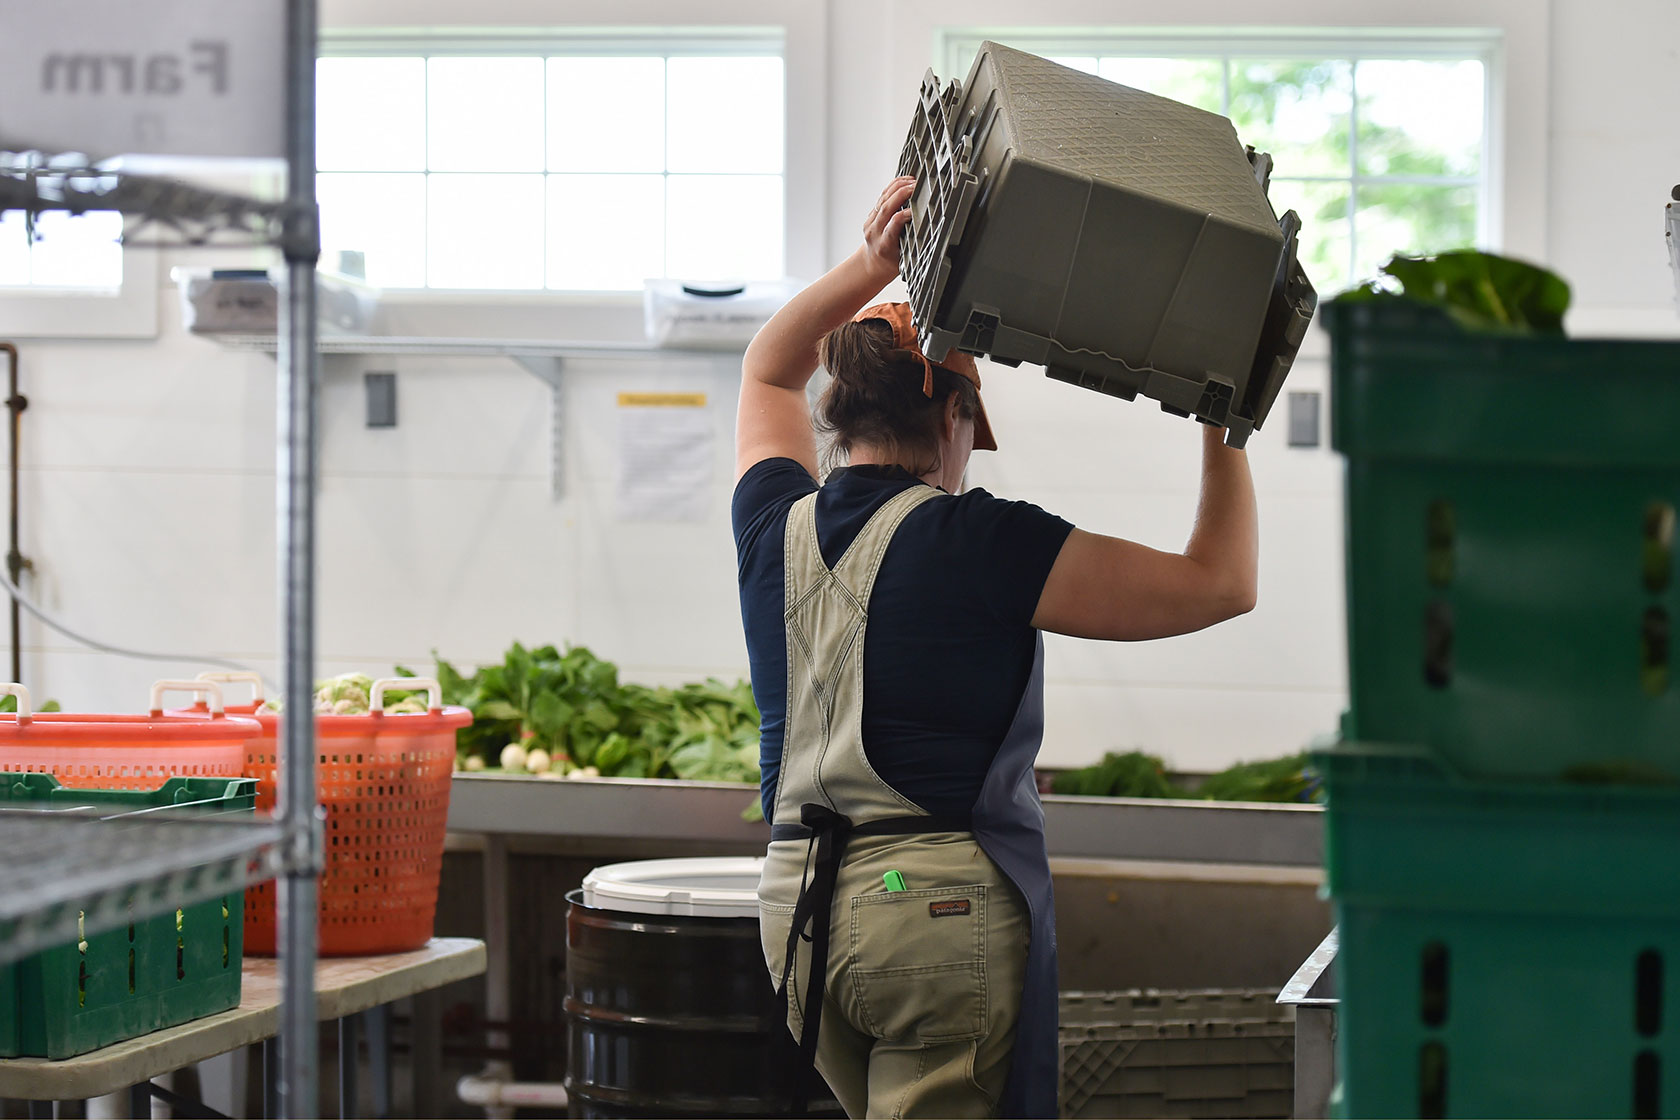 Photo shows a woman in overalls holding a bin, with produce sitting on tables nearby